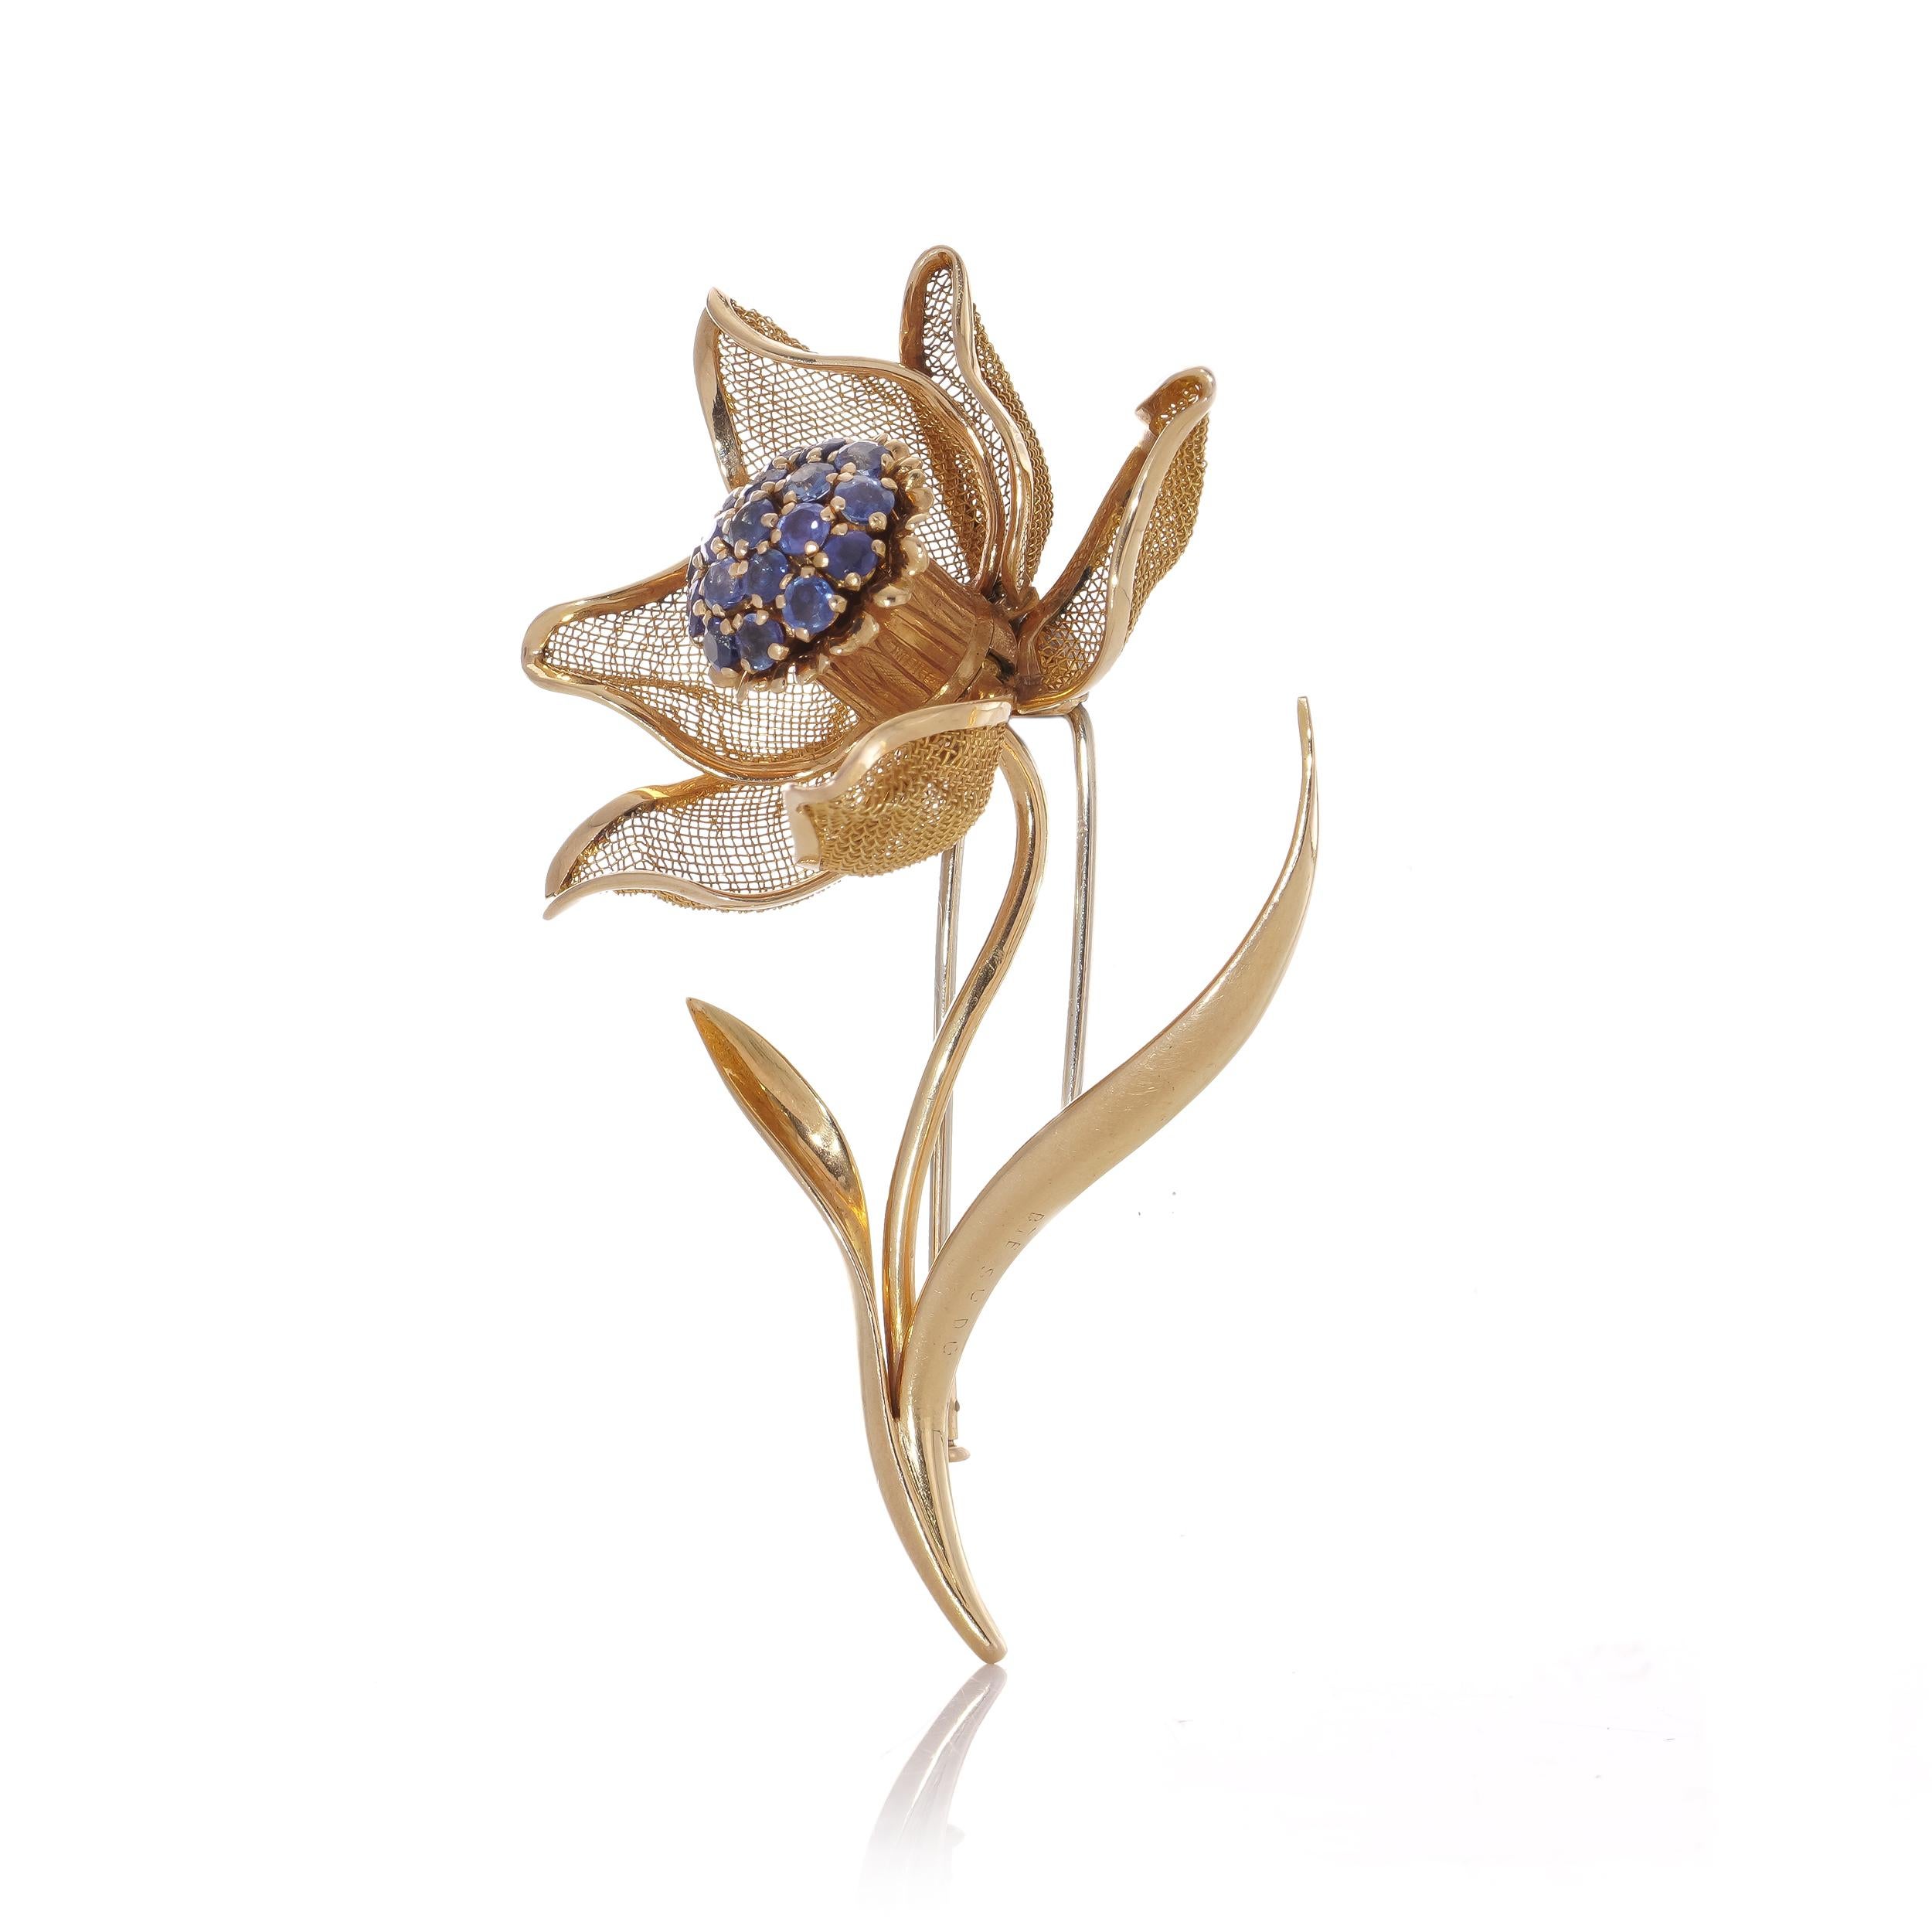 Vintage 18kt. gold floral form brooch with hinged mesh petals set with sapphires In Good Condition For Sale In Braintree, GB